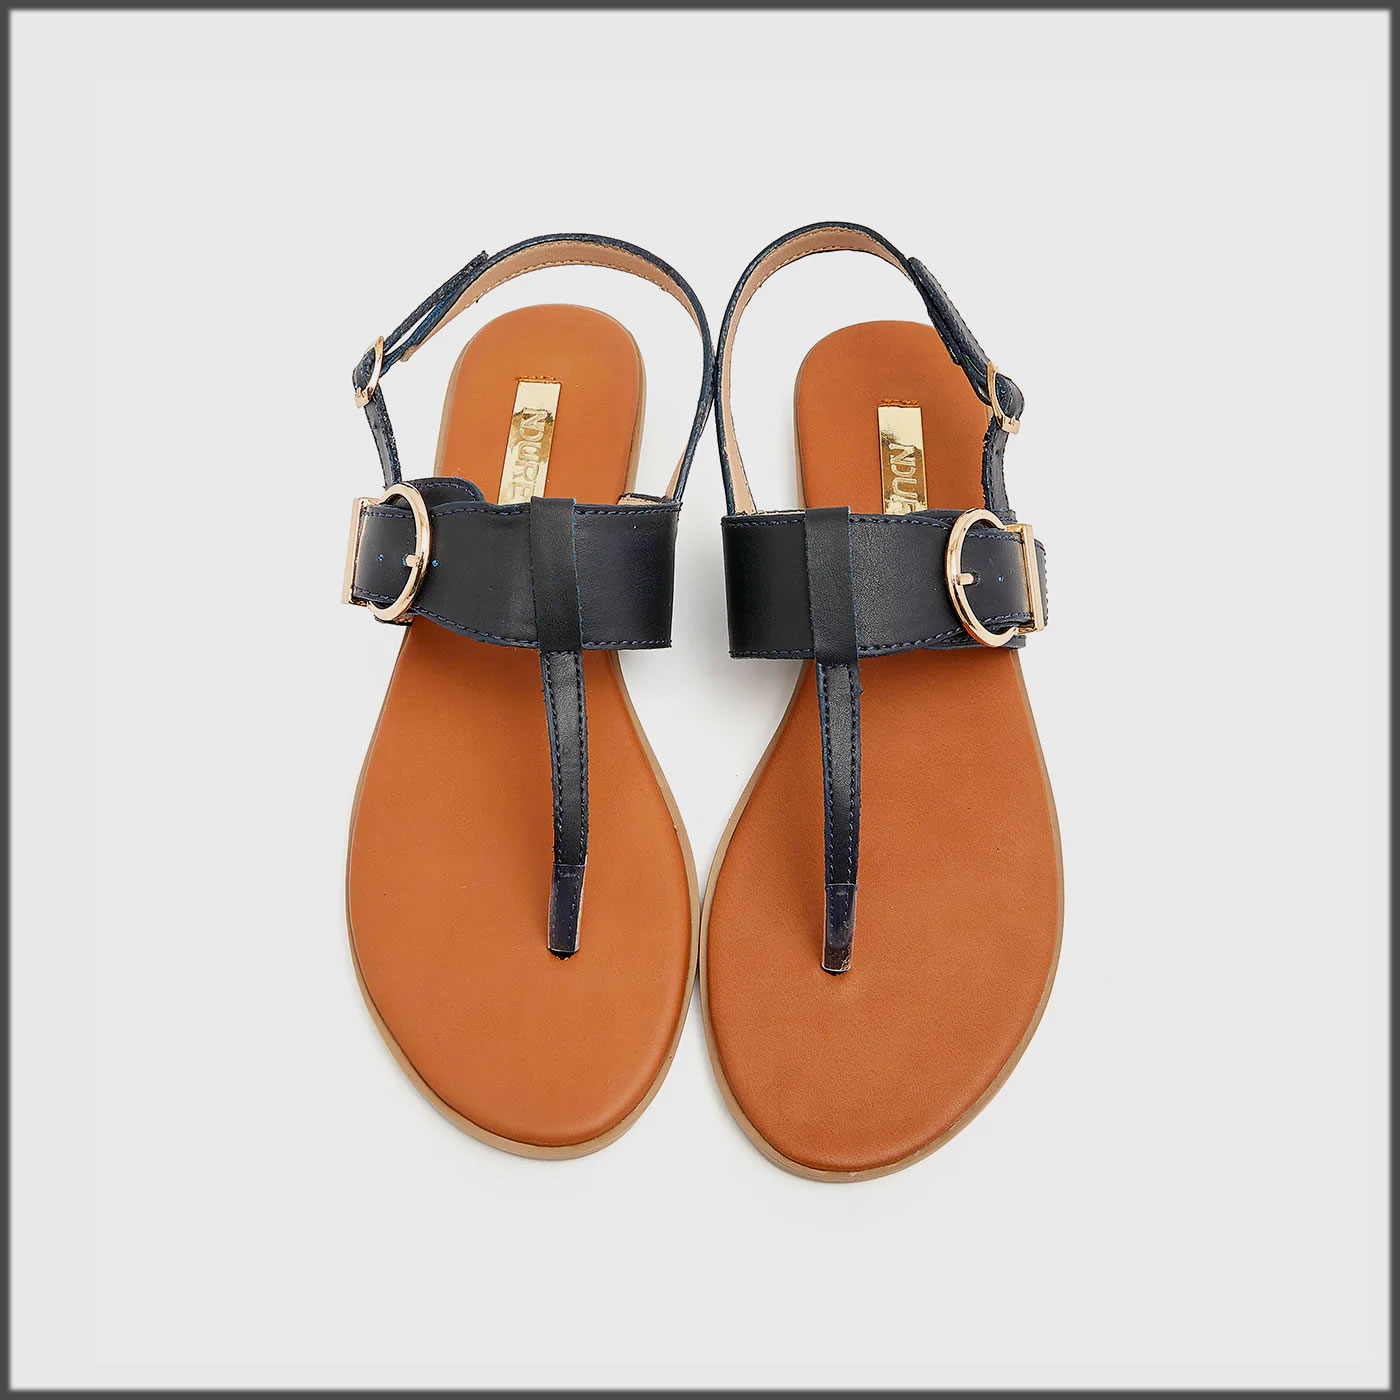 Buckled Sandals for Women